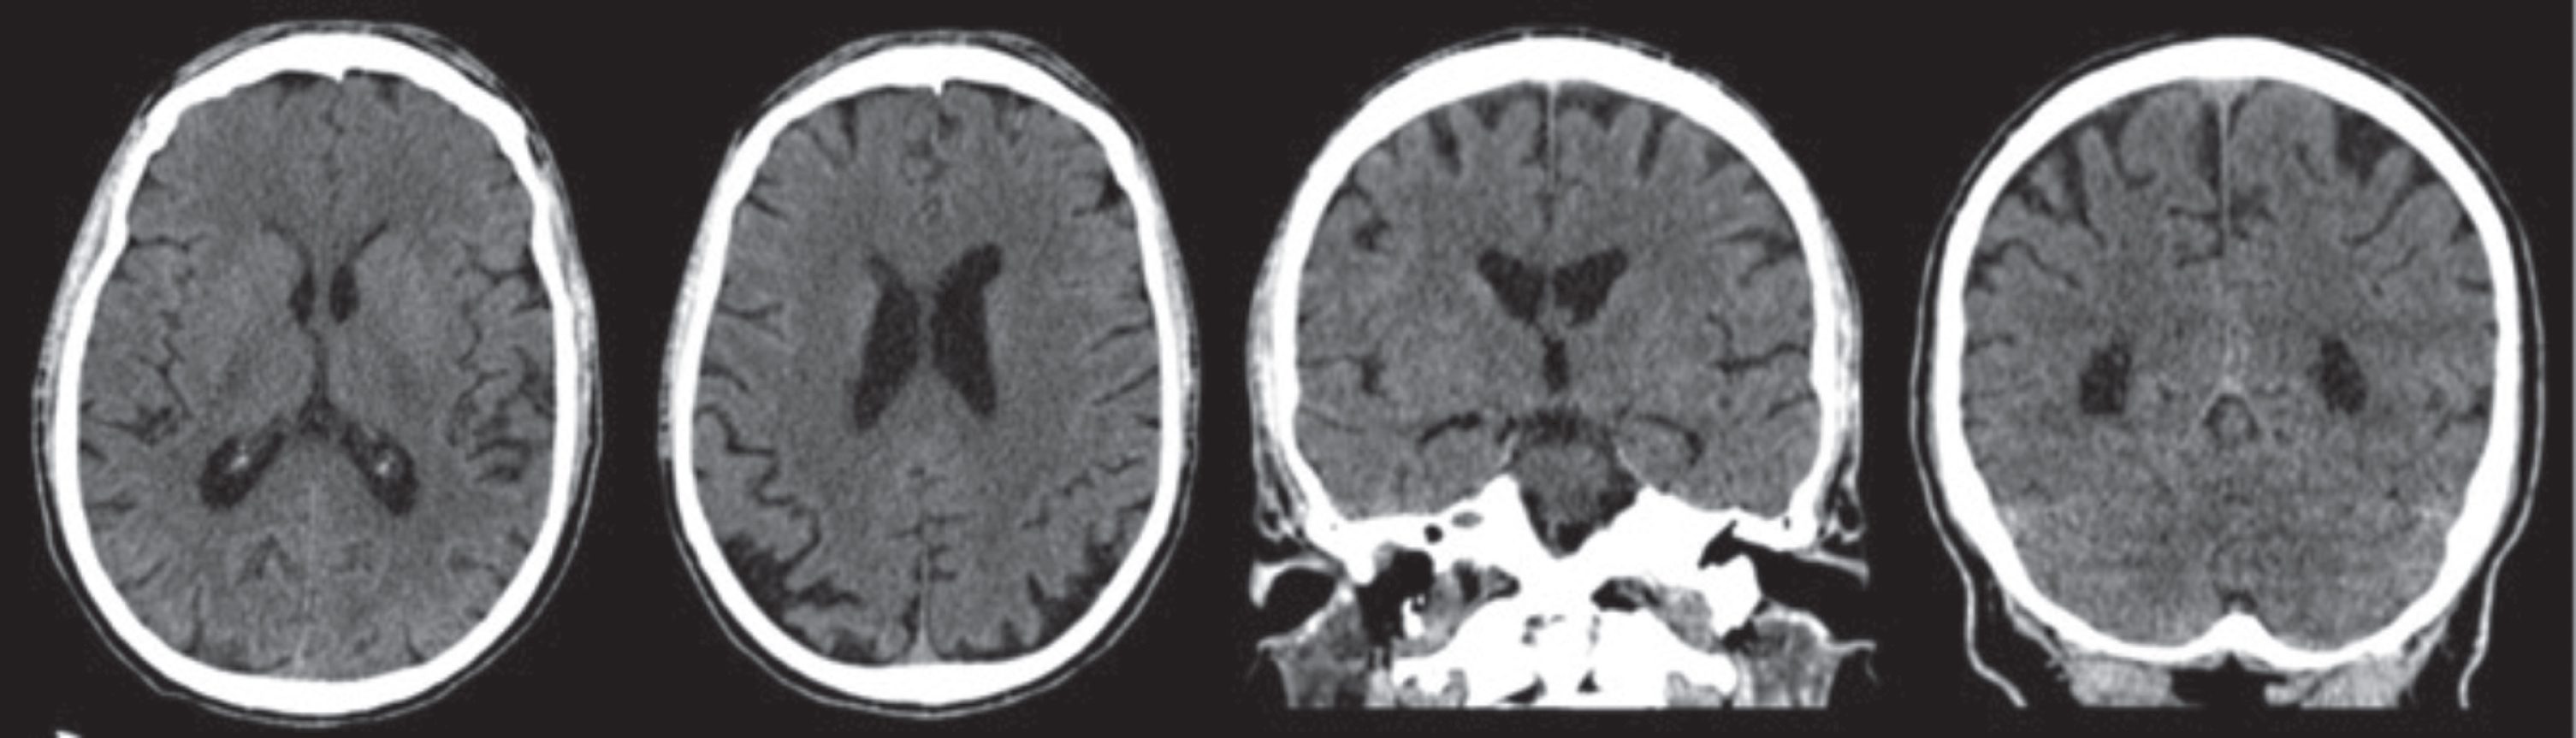 CT scan (December 18, 2018), with no contrast, showing a modest enlargement of subarachnoid spaces of the vault with bilateral parietal cortical atrophy and atrophy of posterior cortex especially in the higher sections. The hippocampus and the mesial temporal area appear fairly preserved. Sagittal section not available.